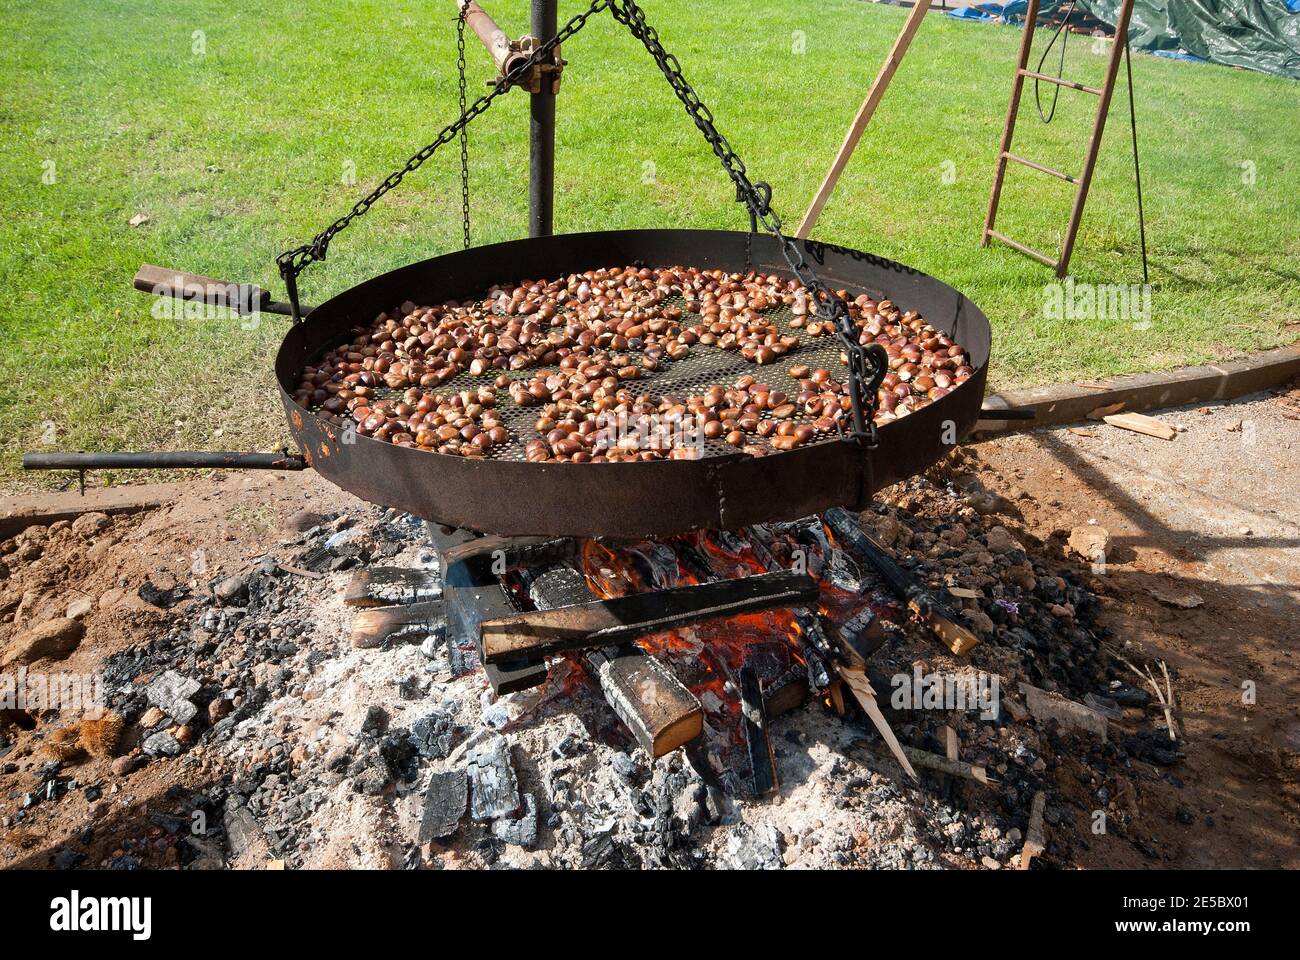 Chestnuts roasting on brazier during the Autumn Festival in Abbadia San Salvatore, Tuscany, Italy Stock Photo